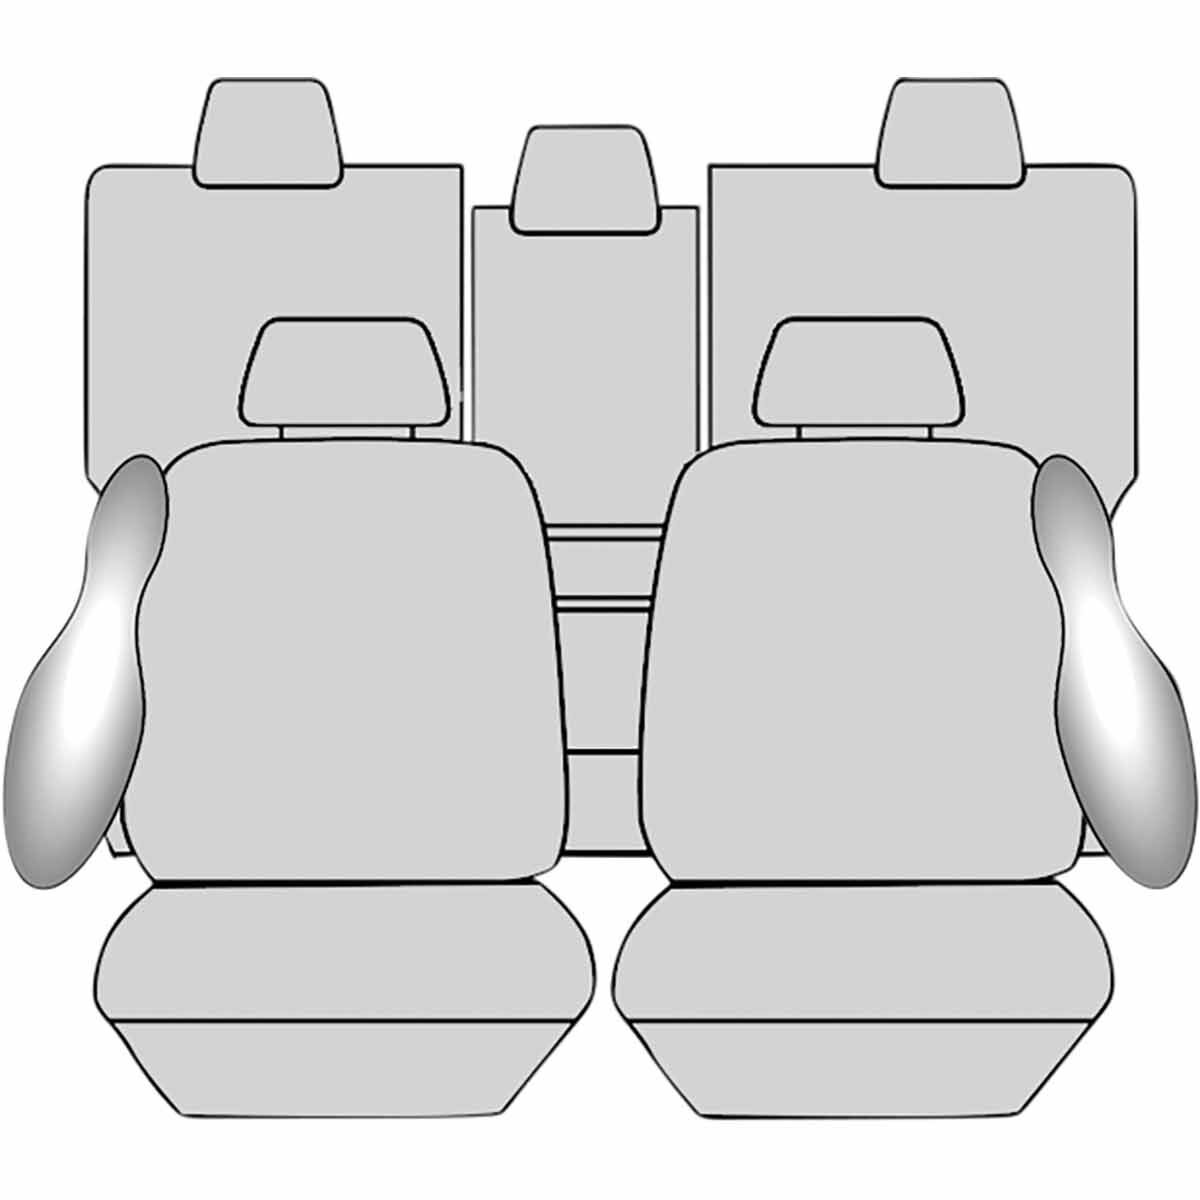 Ilana Imperial Tailor Made Pack for Nissan X-Trail T32 03/14+, , scaau_hi-res